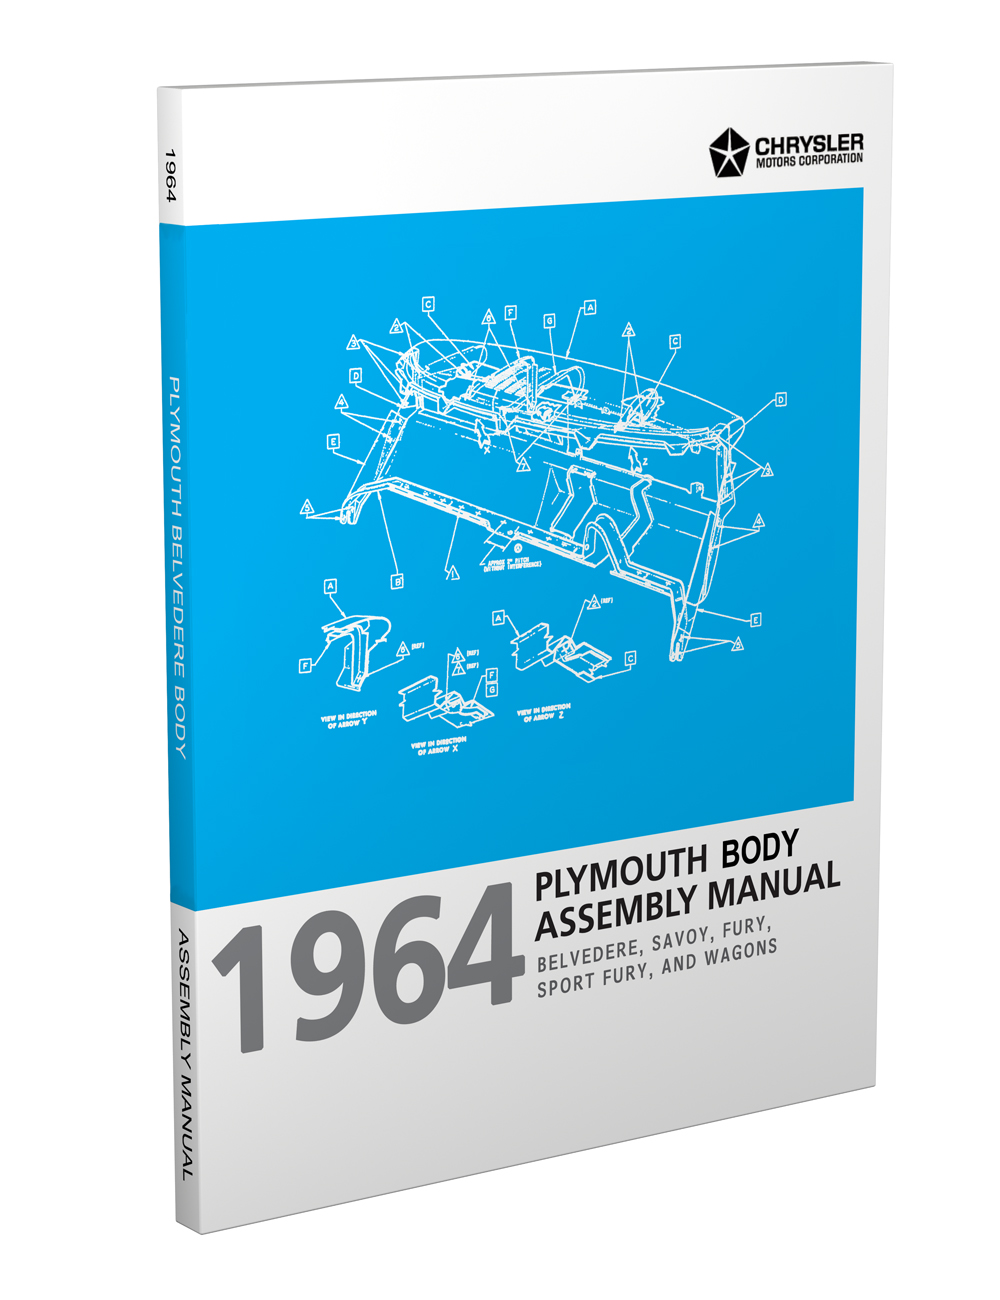 1964 Plymouth Body Assembly Manual Reprint